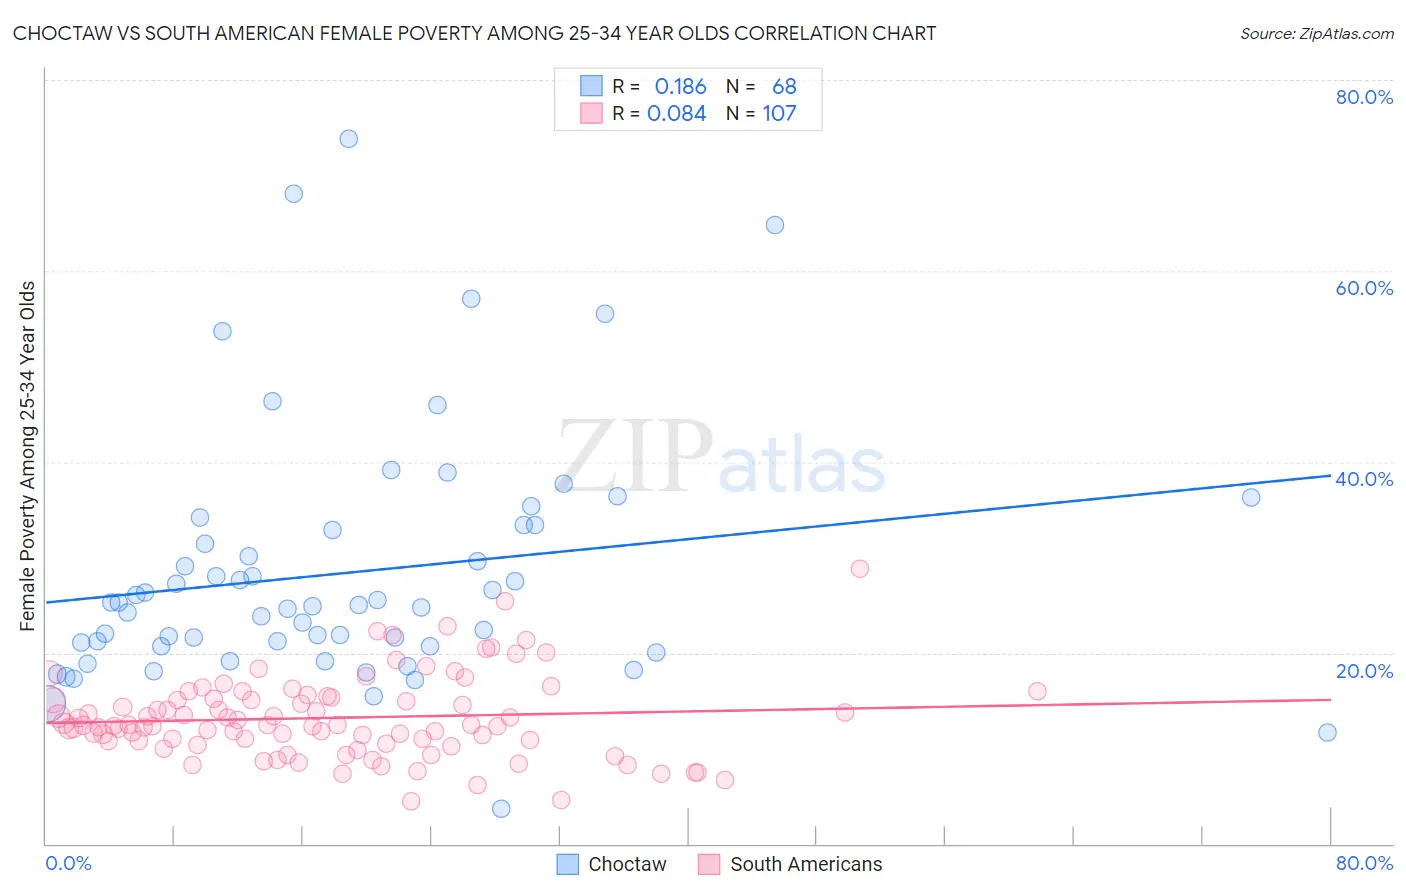 Choctaw vs South American Female Poverty Among 25-34 Year Olds